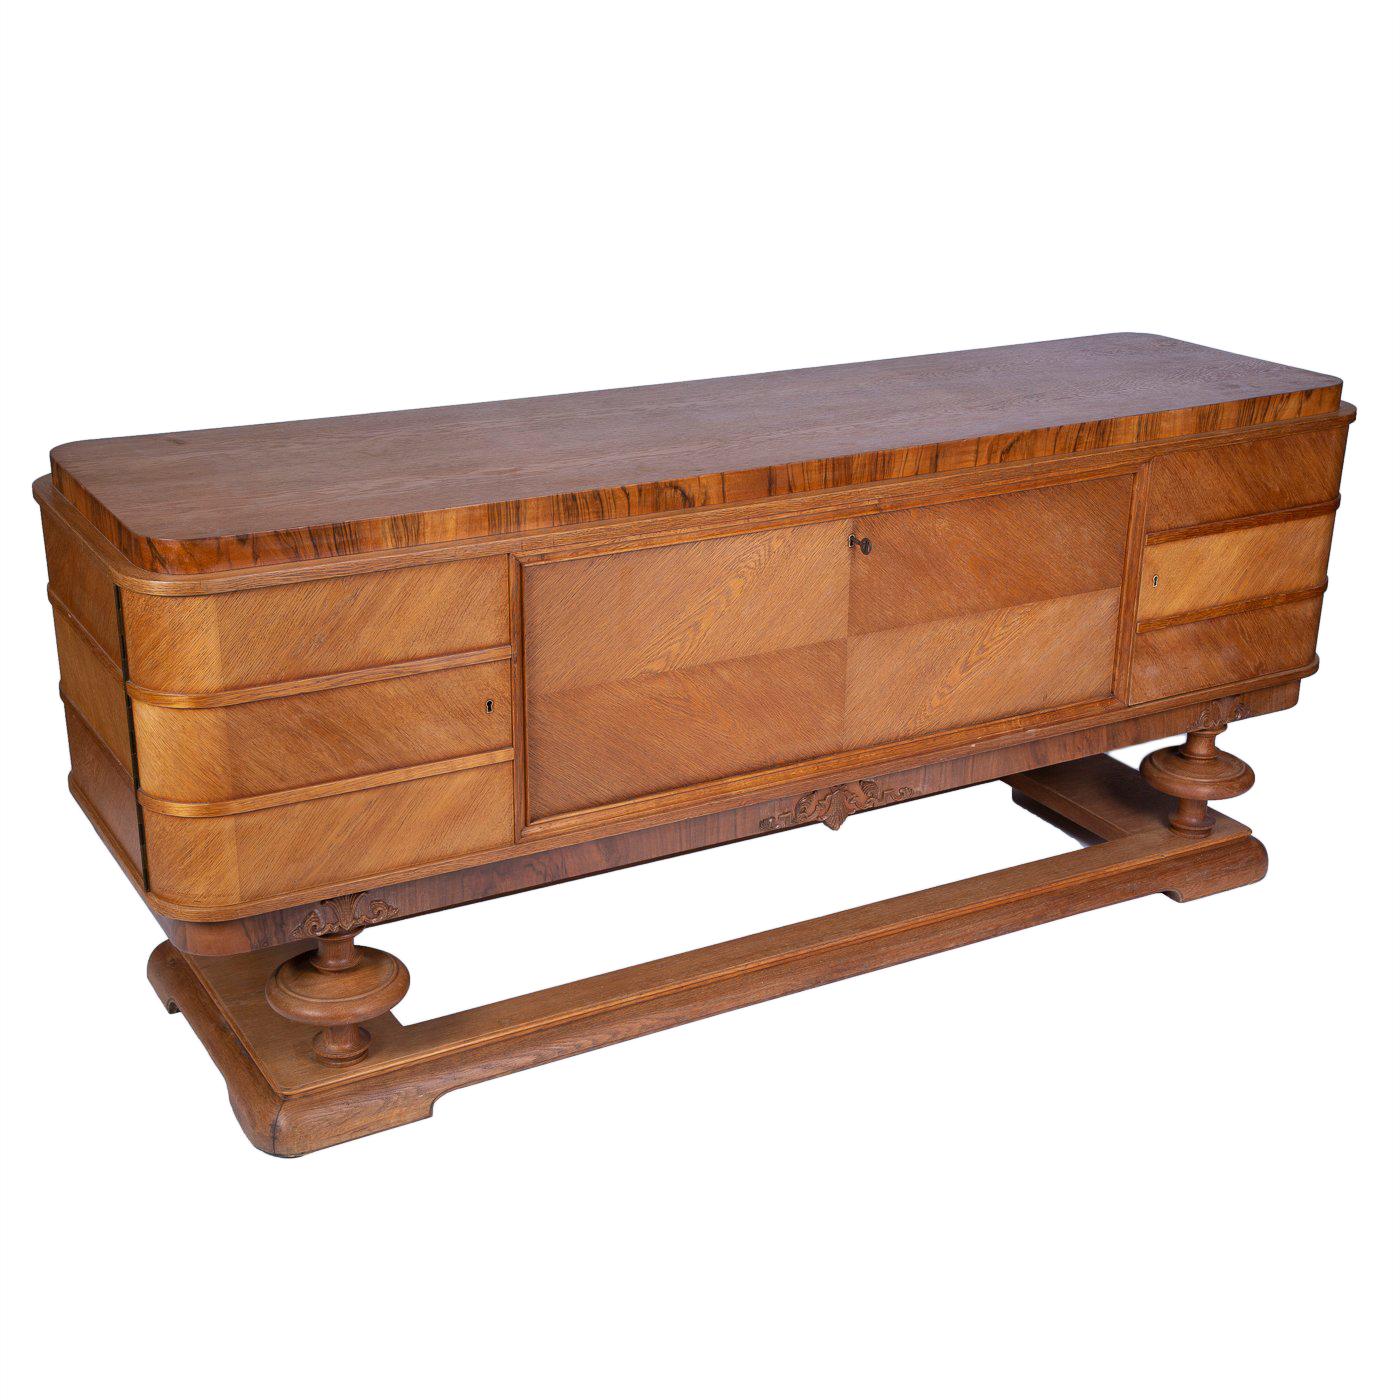 Oak Sideboard Buffet with Lined Canteen Interior for Cutlery